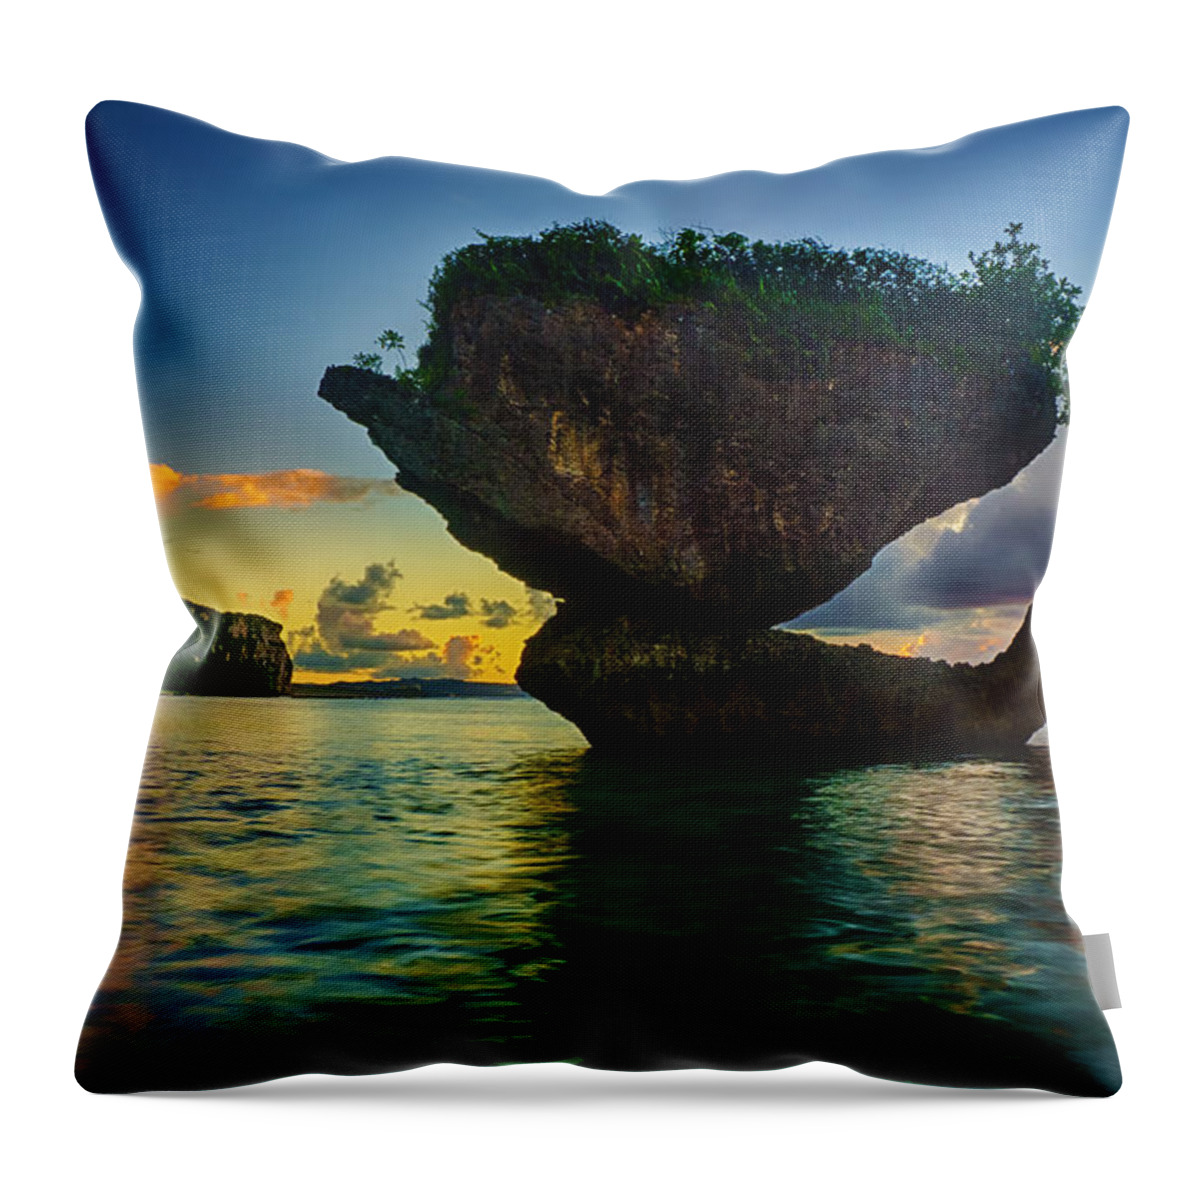 Pristine Throw Pillow featuring the photograph Nature's Sculpture by Amanda Jones